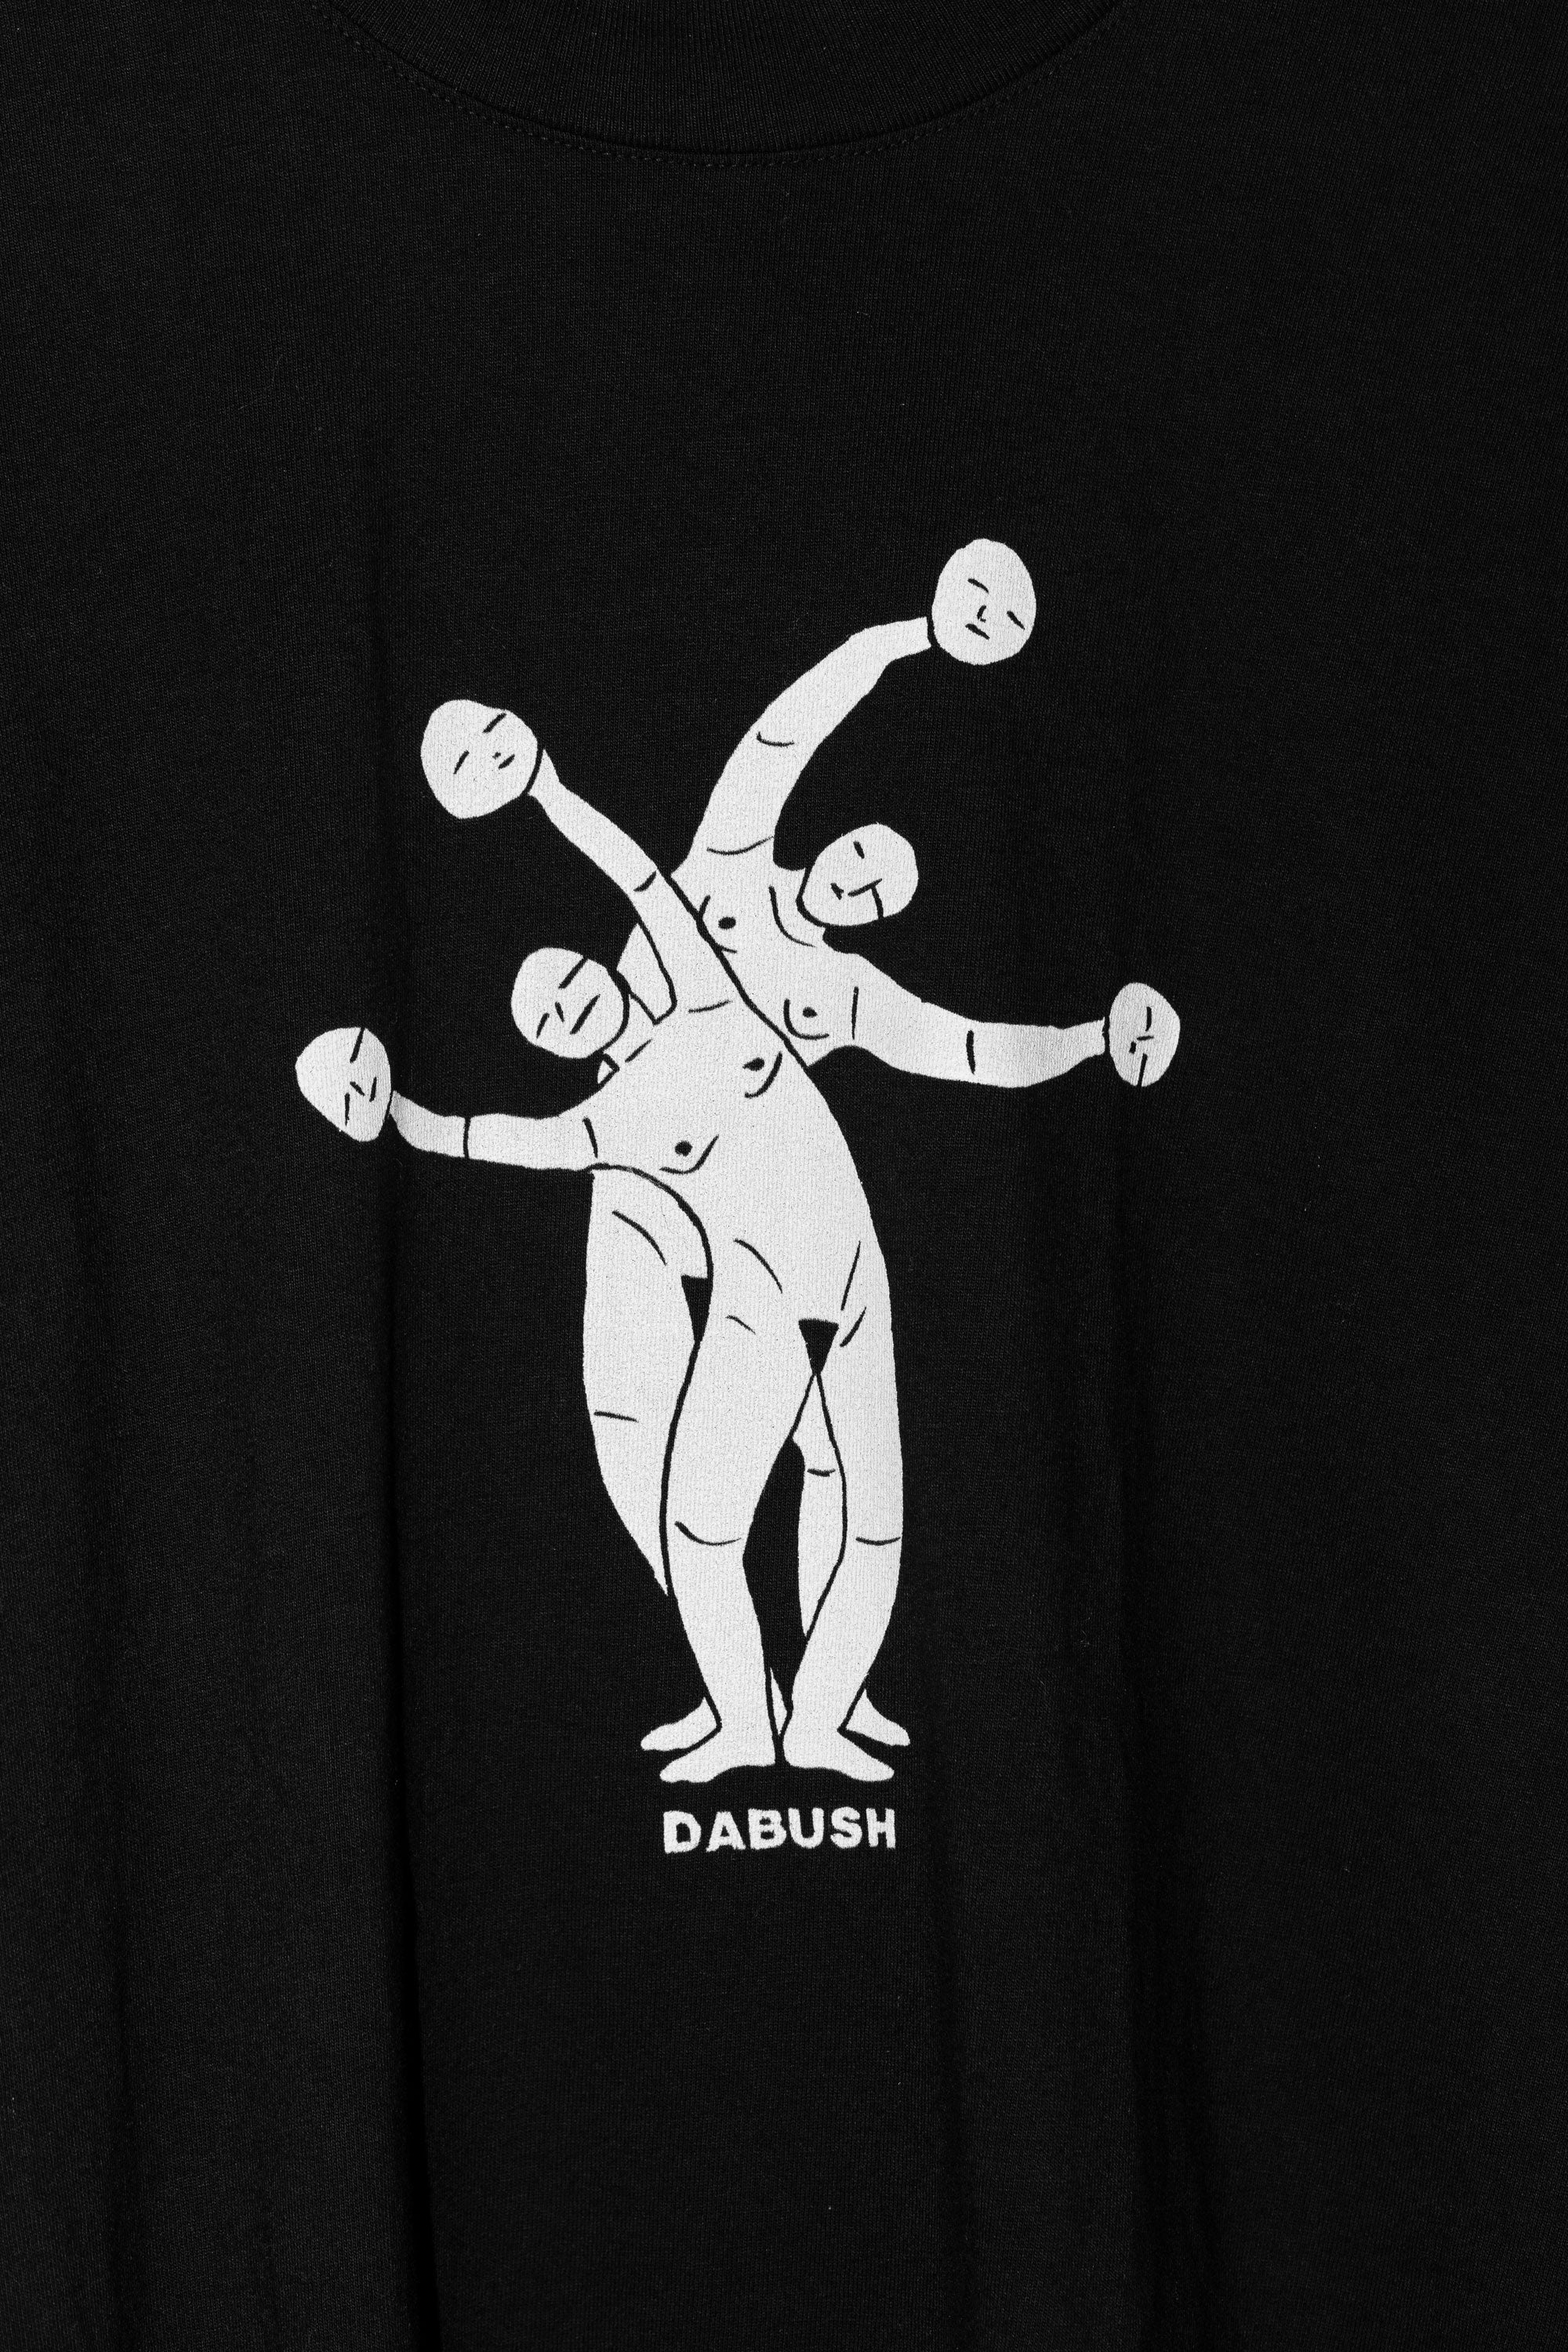 SYNERGY T-SHIRT. 100% Cotton, oversized tee with Back and front print. Made in Tel aviv. Shop and view the latest Drops from the official DABUSH website. Worldwide Shipping. DABUSH is a publishing house, design studio and a brand based in Tel Aviv, Israel.